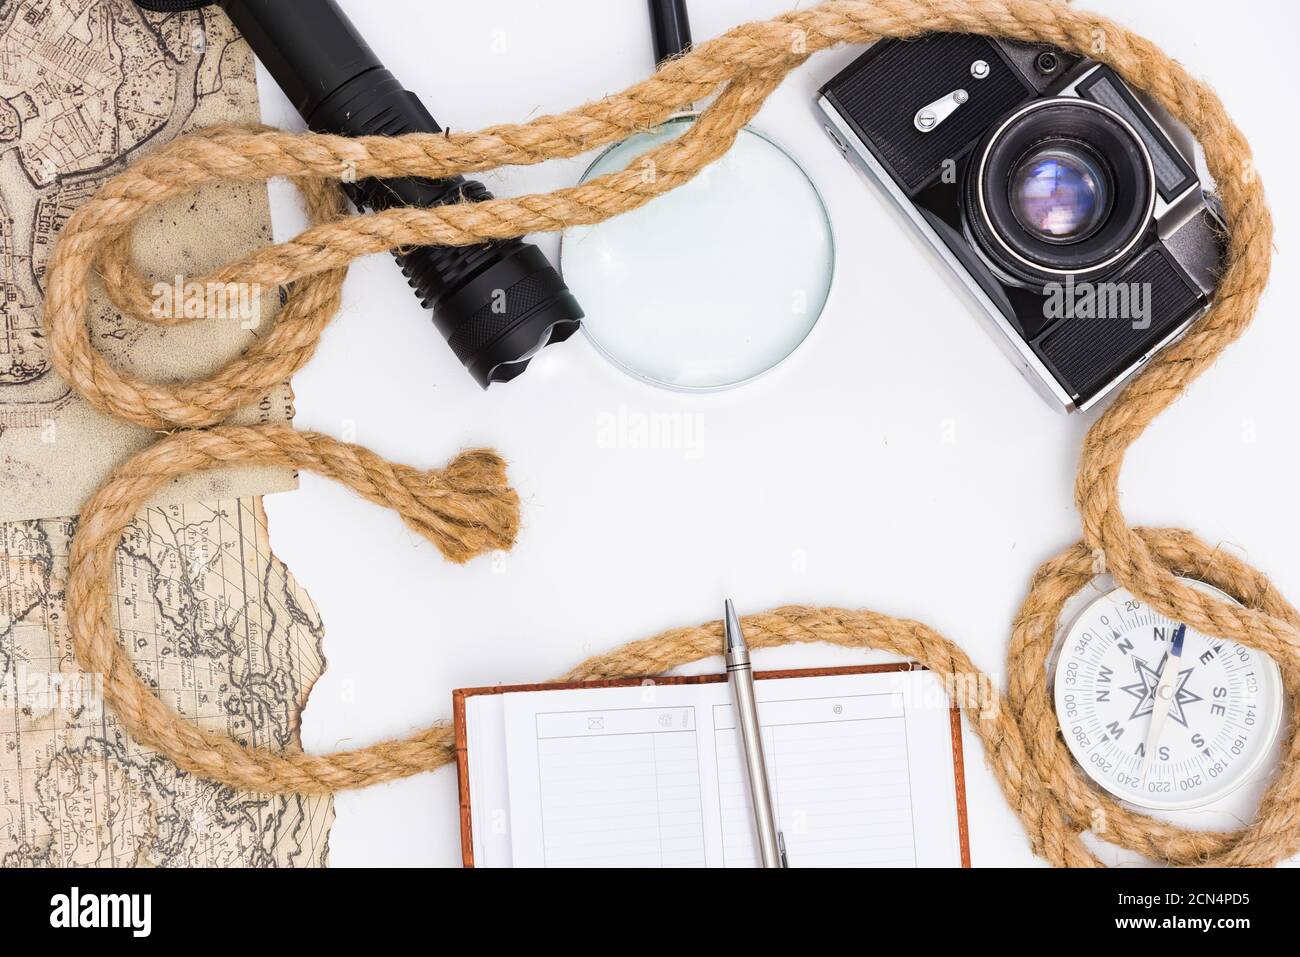 items for outdoor activities on vacation Stock Photo